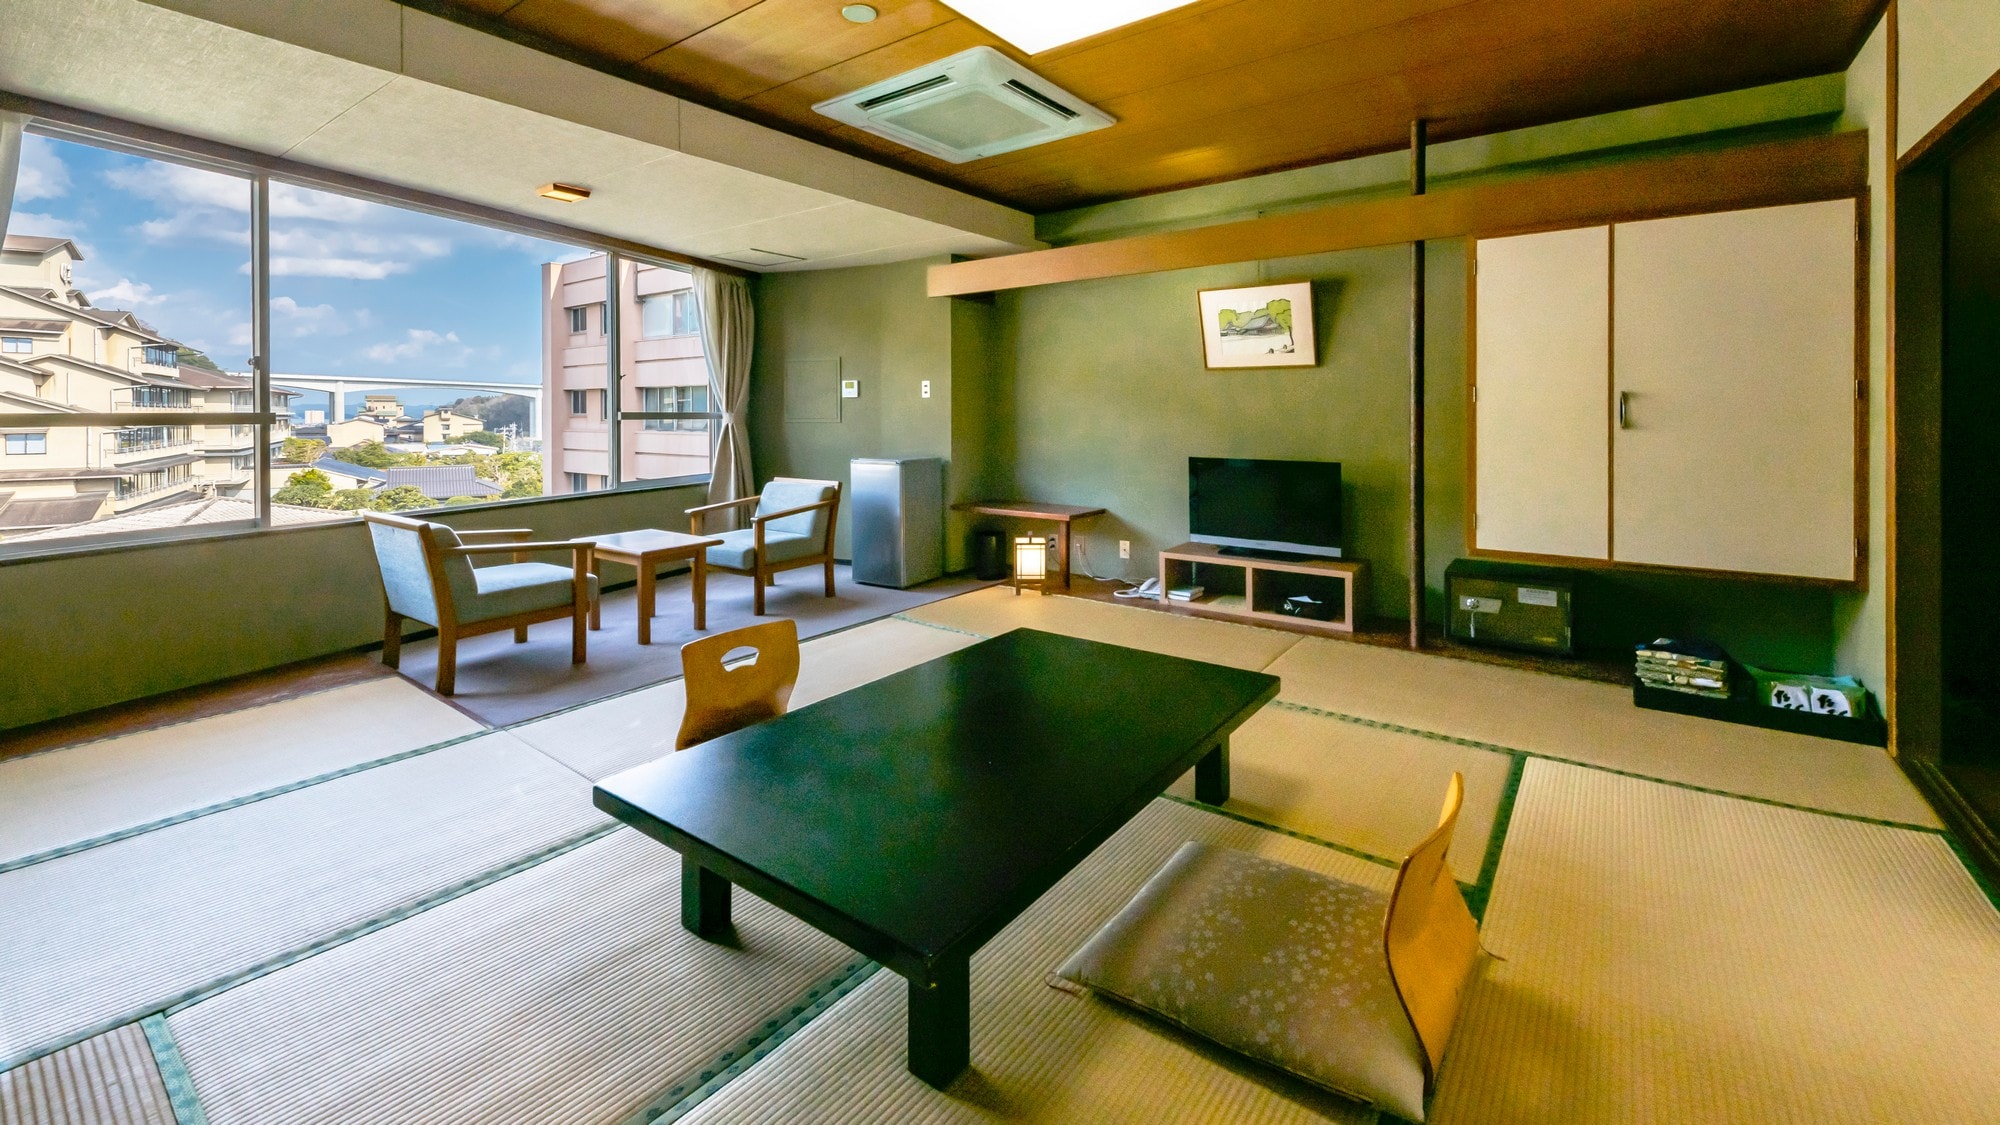 A standard Japanese-style room with a calm atmosphere. Please relax.